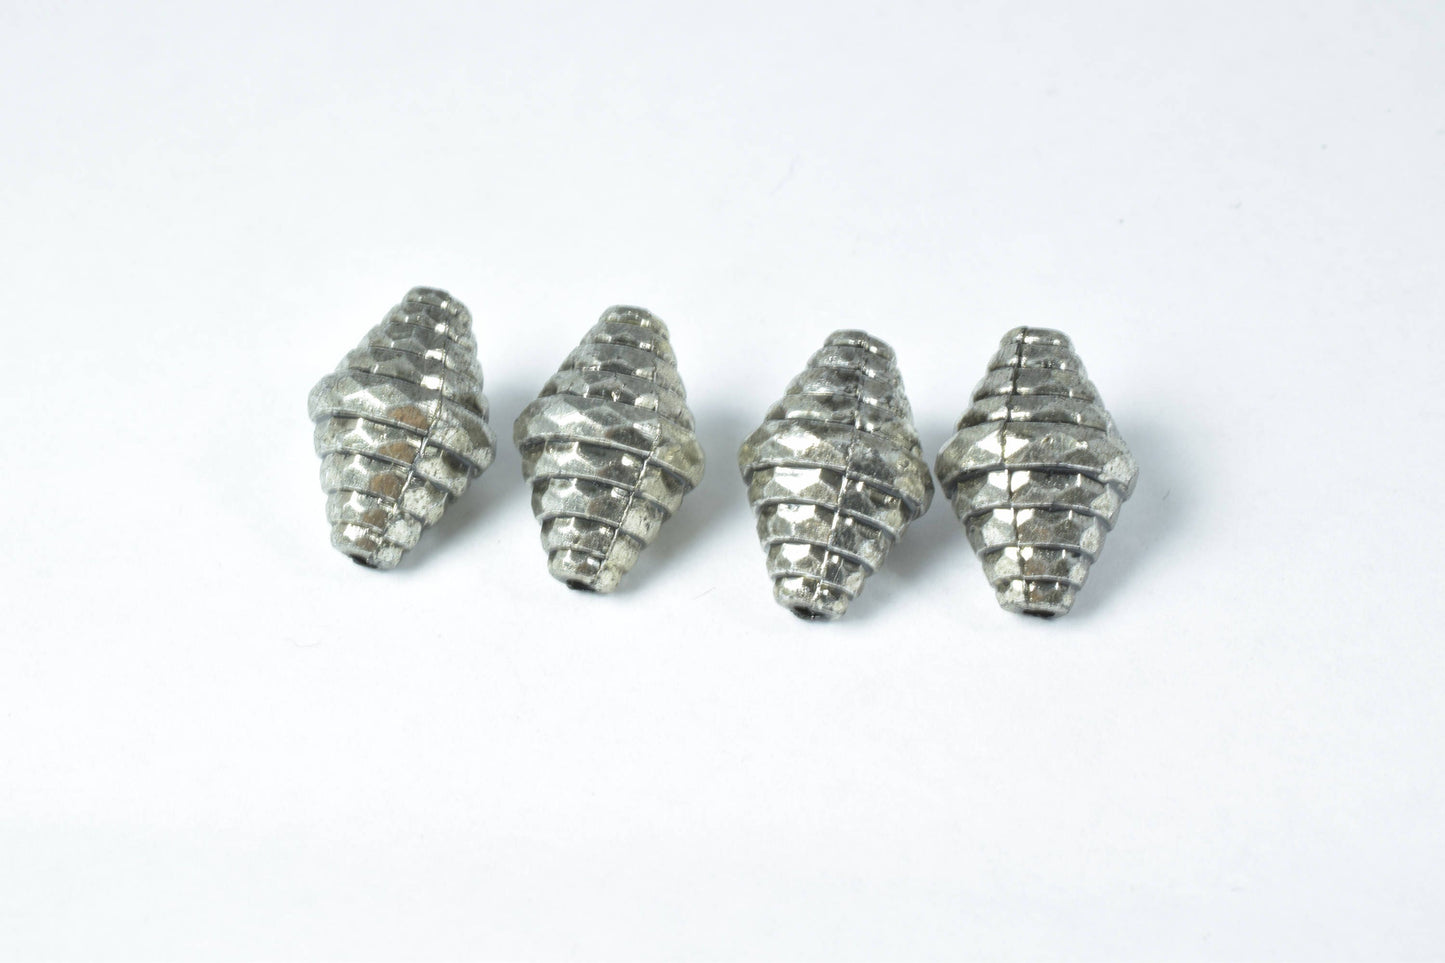 11x17mm Silver Tube Plastic Textured Beads/Plastic Silver Cone Beads/2mm hole size/Sold by 200pcs/Wholesale Beads/Beads/Silver Cyclone Beads